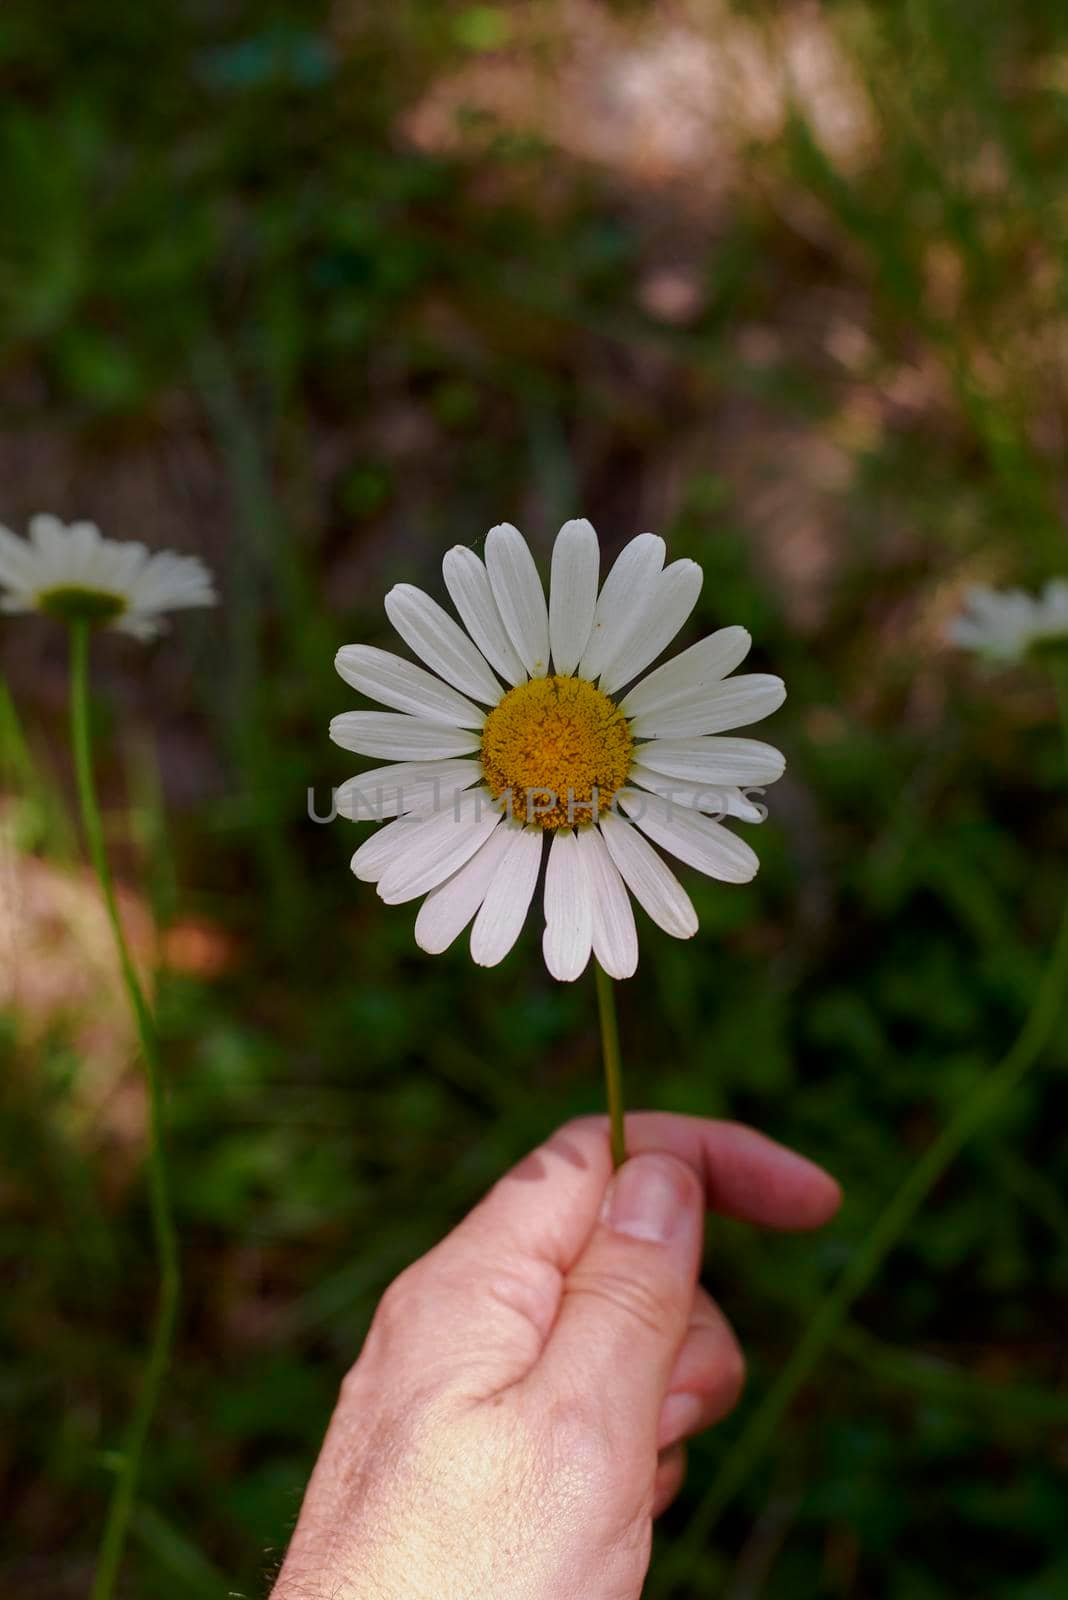 Hand holding a daisy flower with stem by raul_ruiz